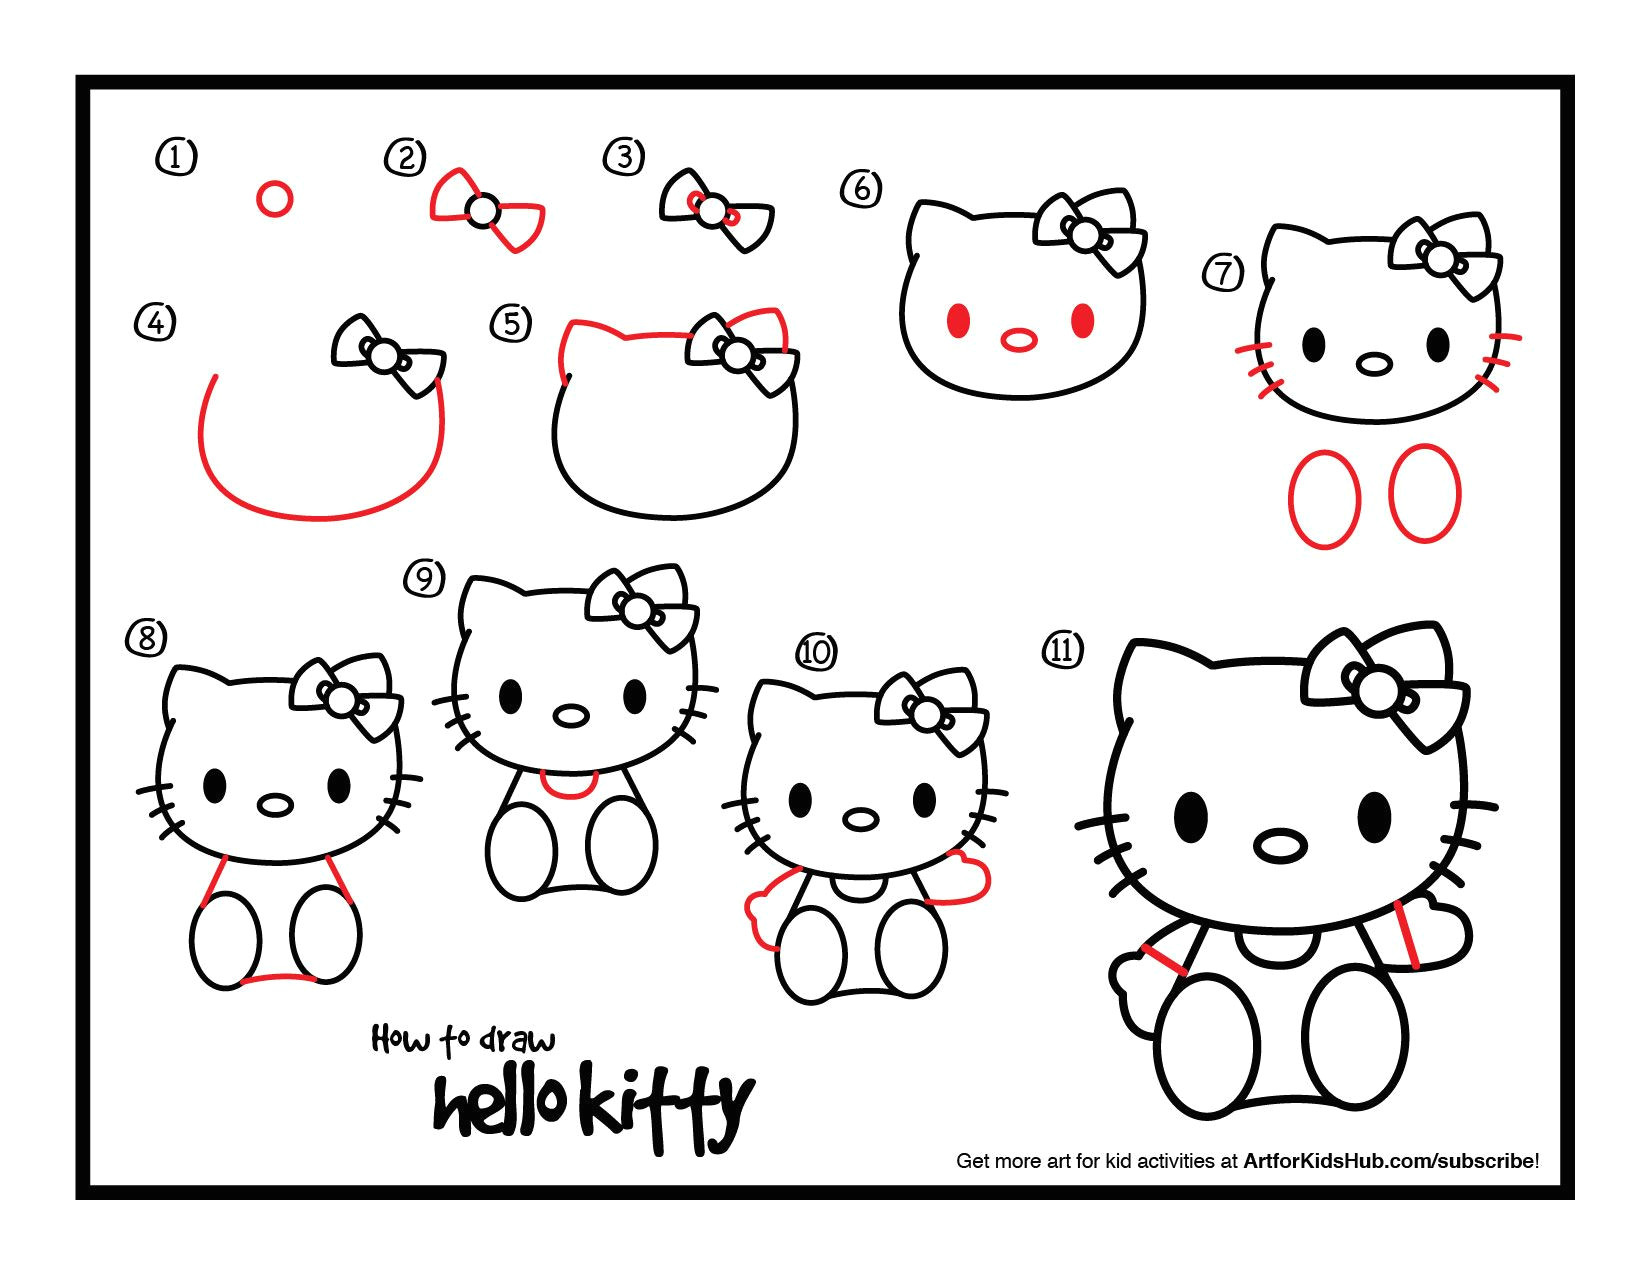 Easy Kitty Drawing How to Draw Hello Kitty How to Doodle Hello Kitty Art